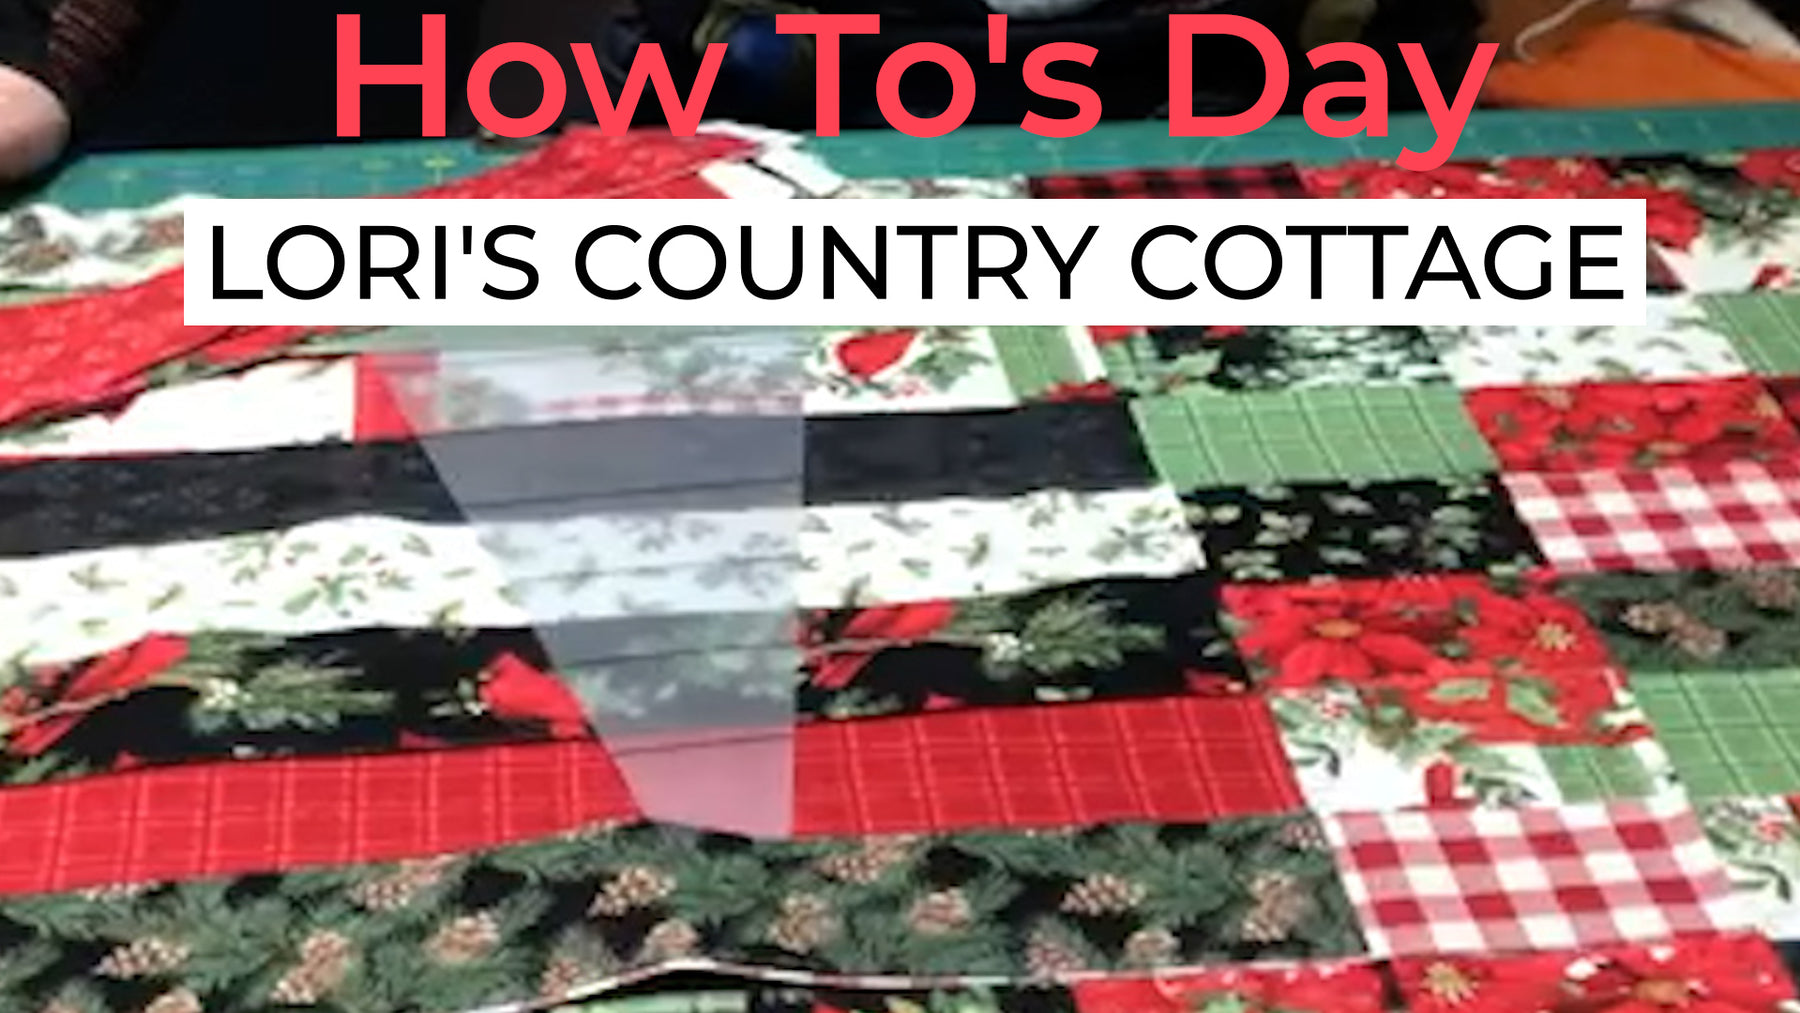 How To's Day - Christmas Tree Skirt Variation